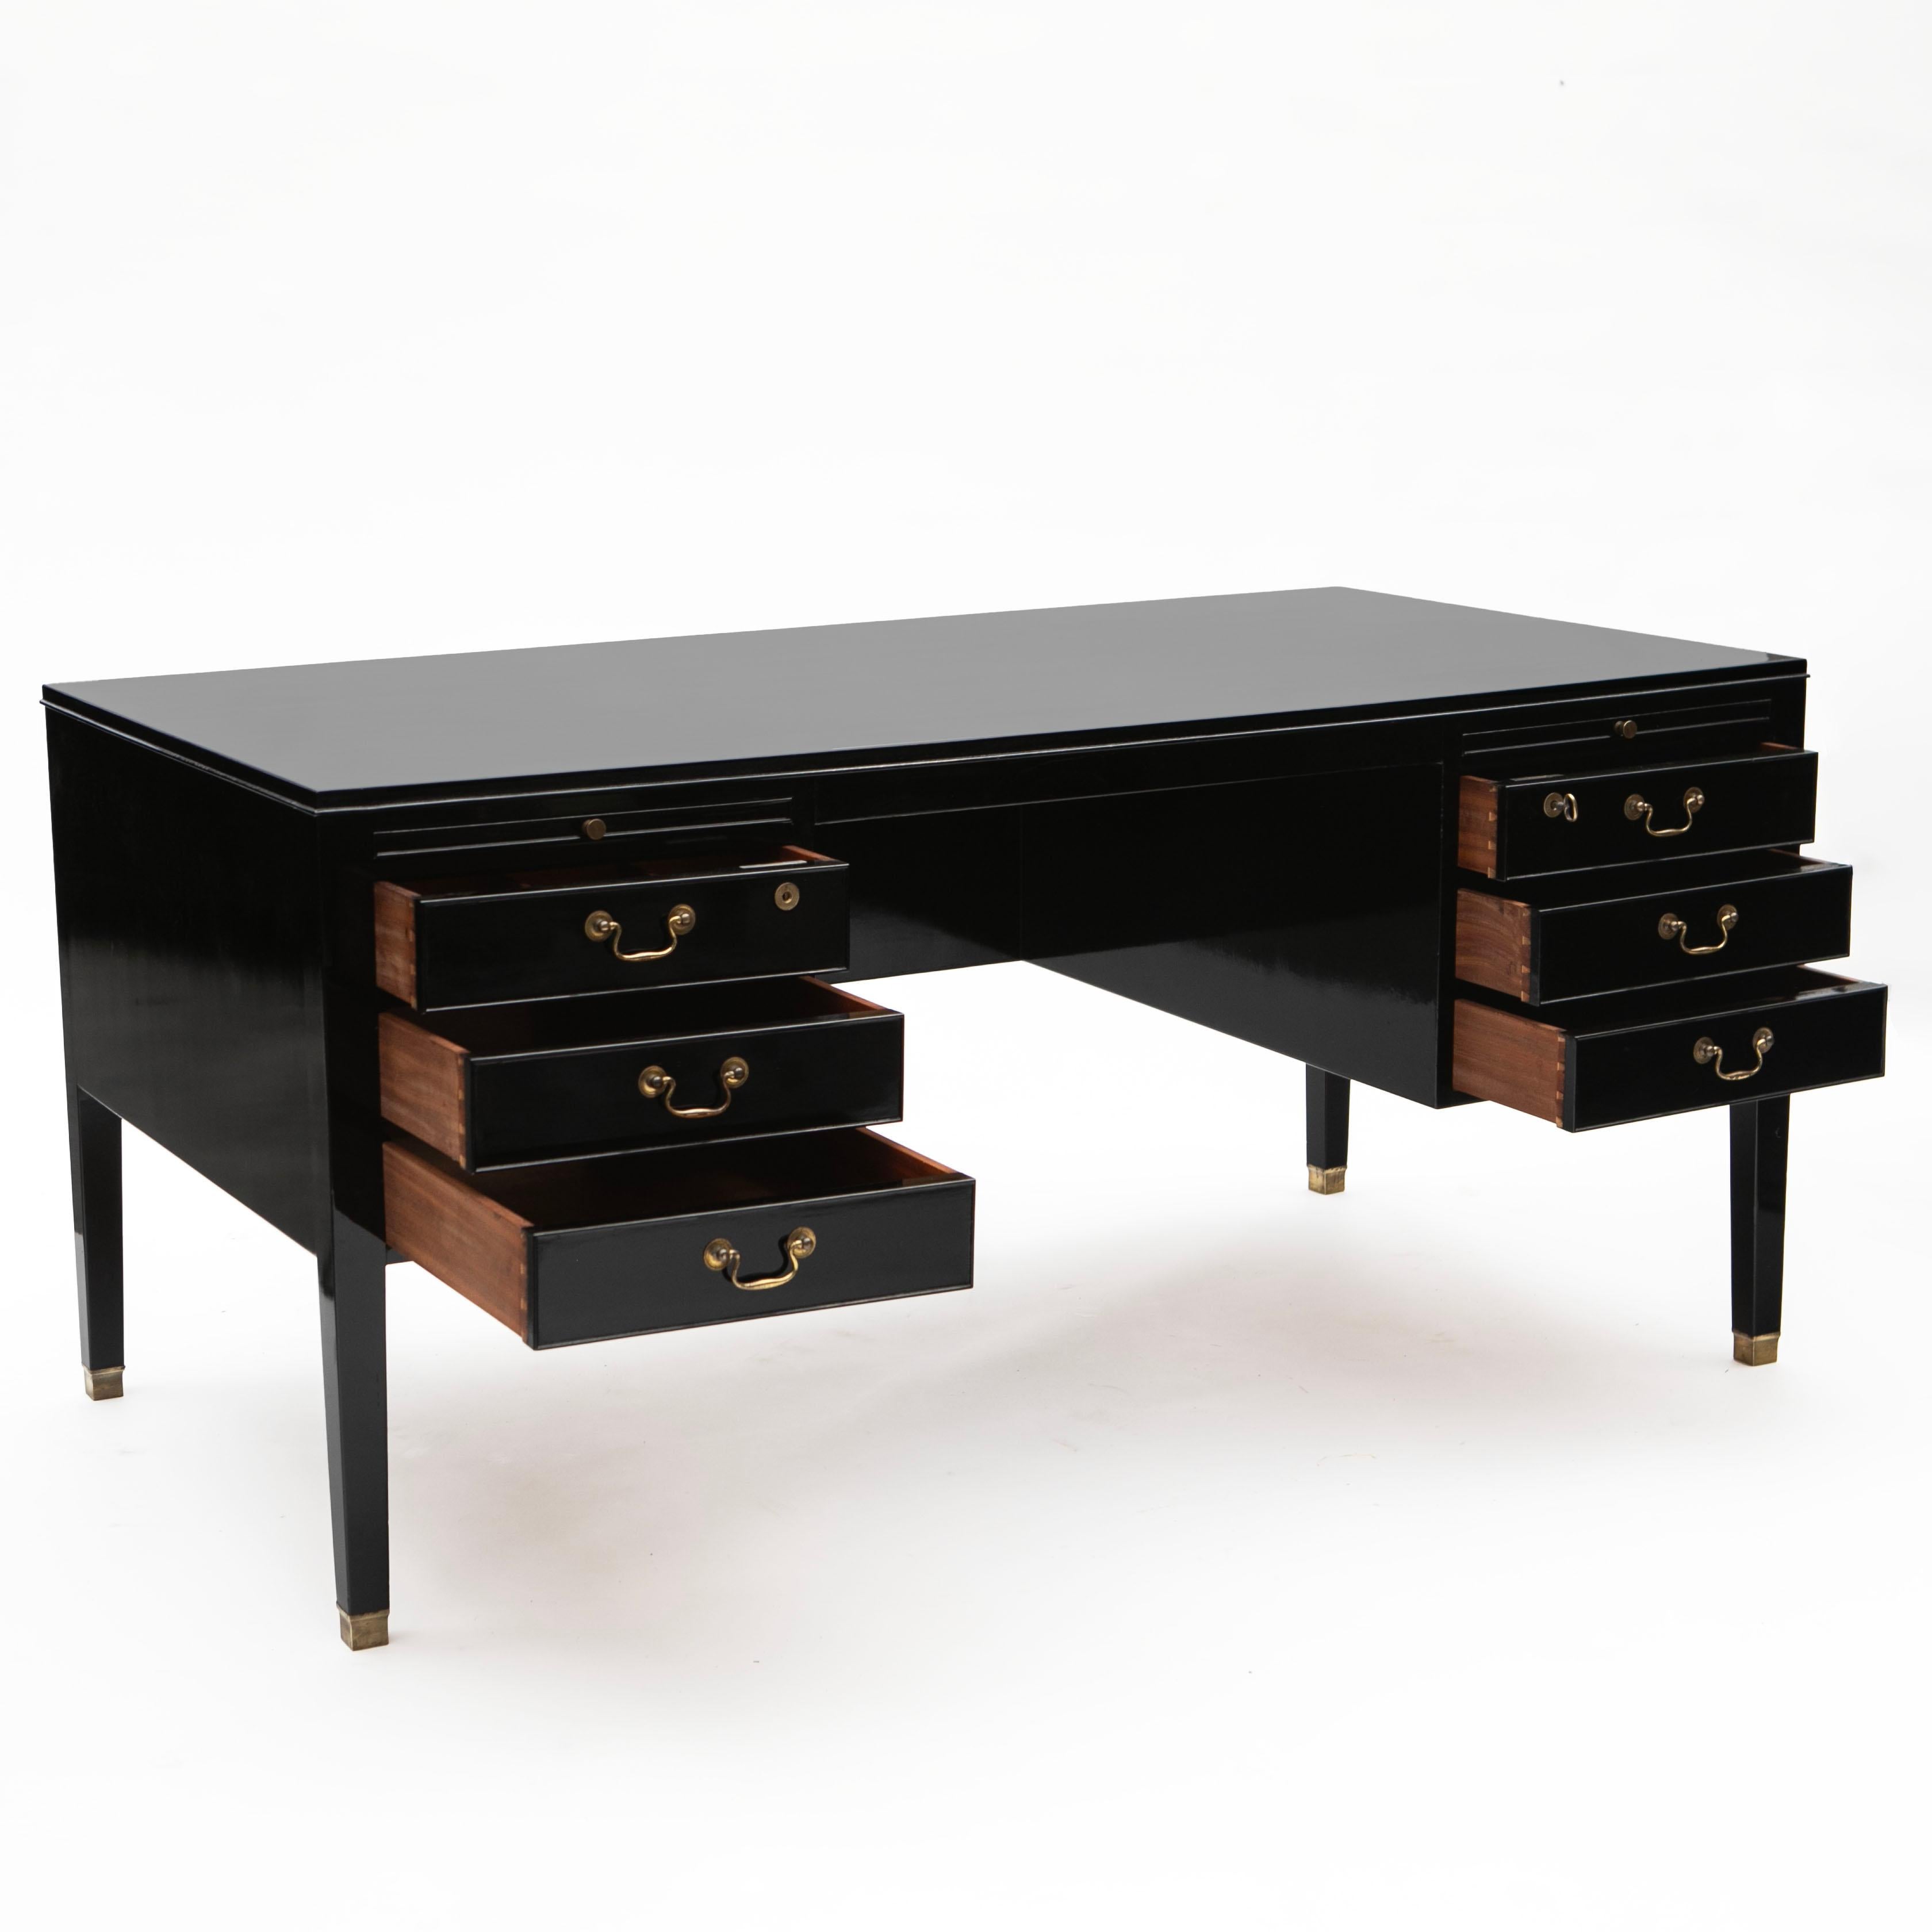 Ole Wanscher, Danish 1903-1985.

Mid-century desk in black polished mahogany by Danish cabinetmaker and designer Ole Wanscher.
Six drawers (2x3) with original brass handles and locks above pull-out trays. Resting on elegant tapered legs ending in